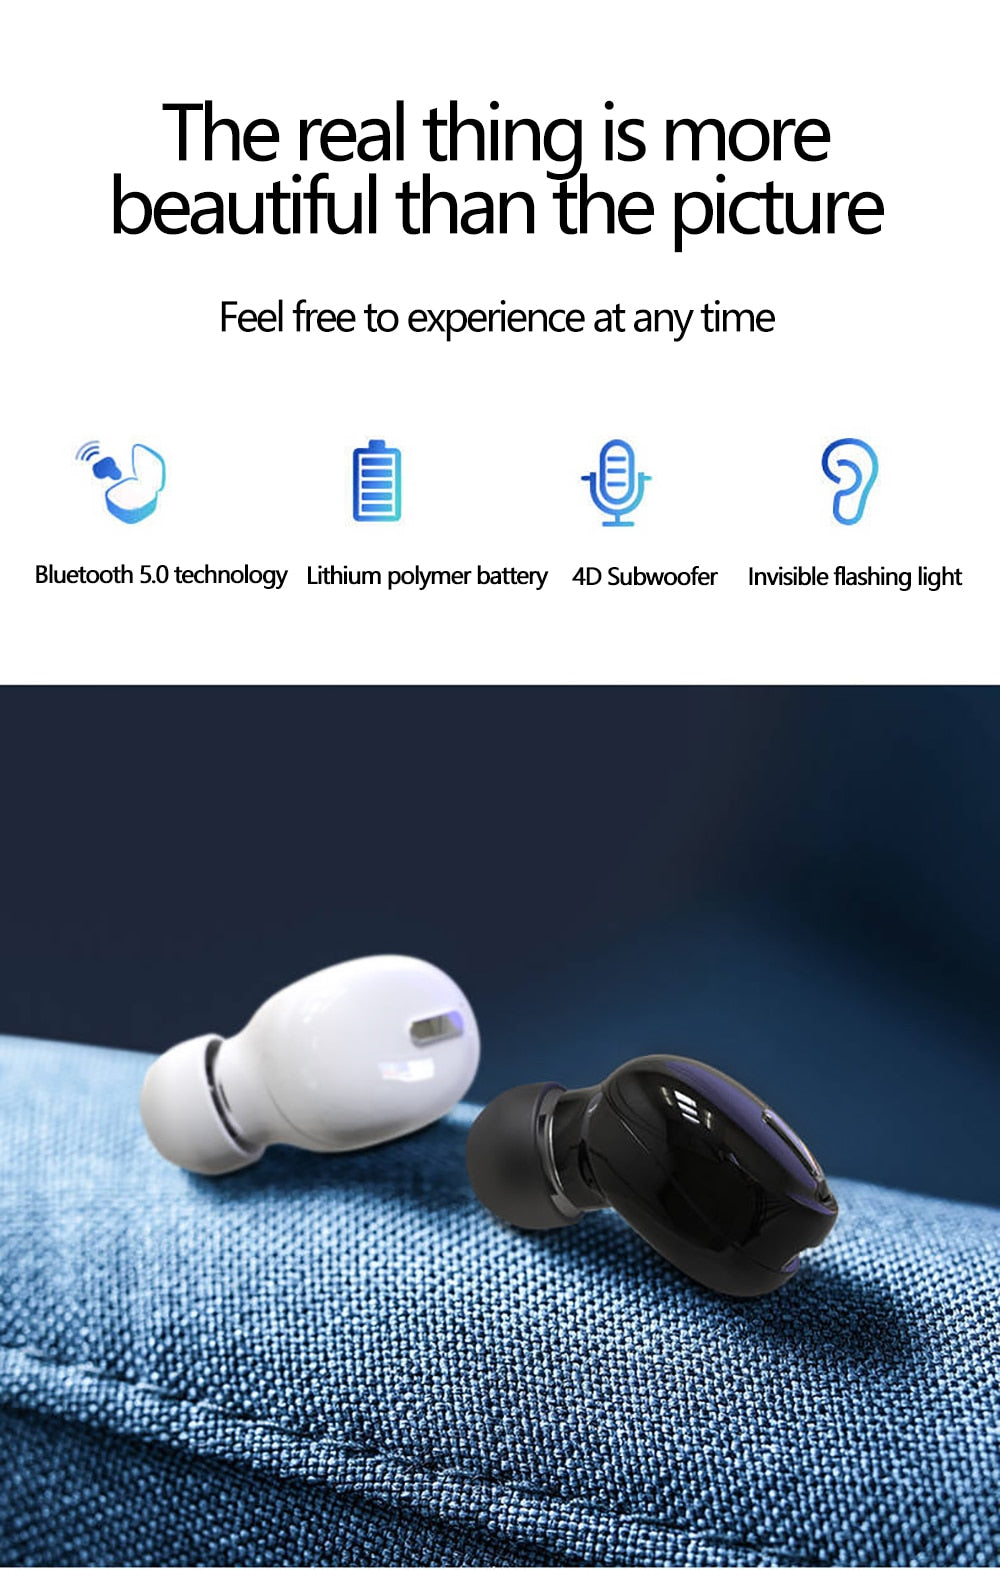 Bluetooth Earphone X9/S9 Mini5.0 Sport Gaming Headset with Mic Wireless Earbud For Xiaomi All Phones Handsfree Stereo Headphone